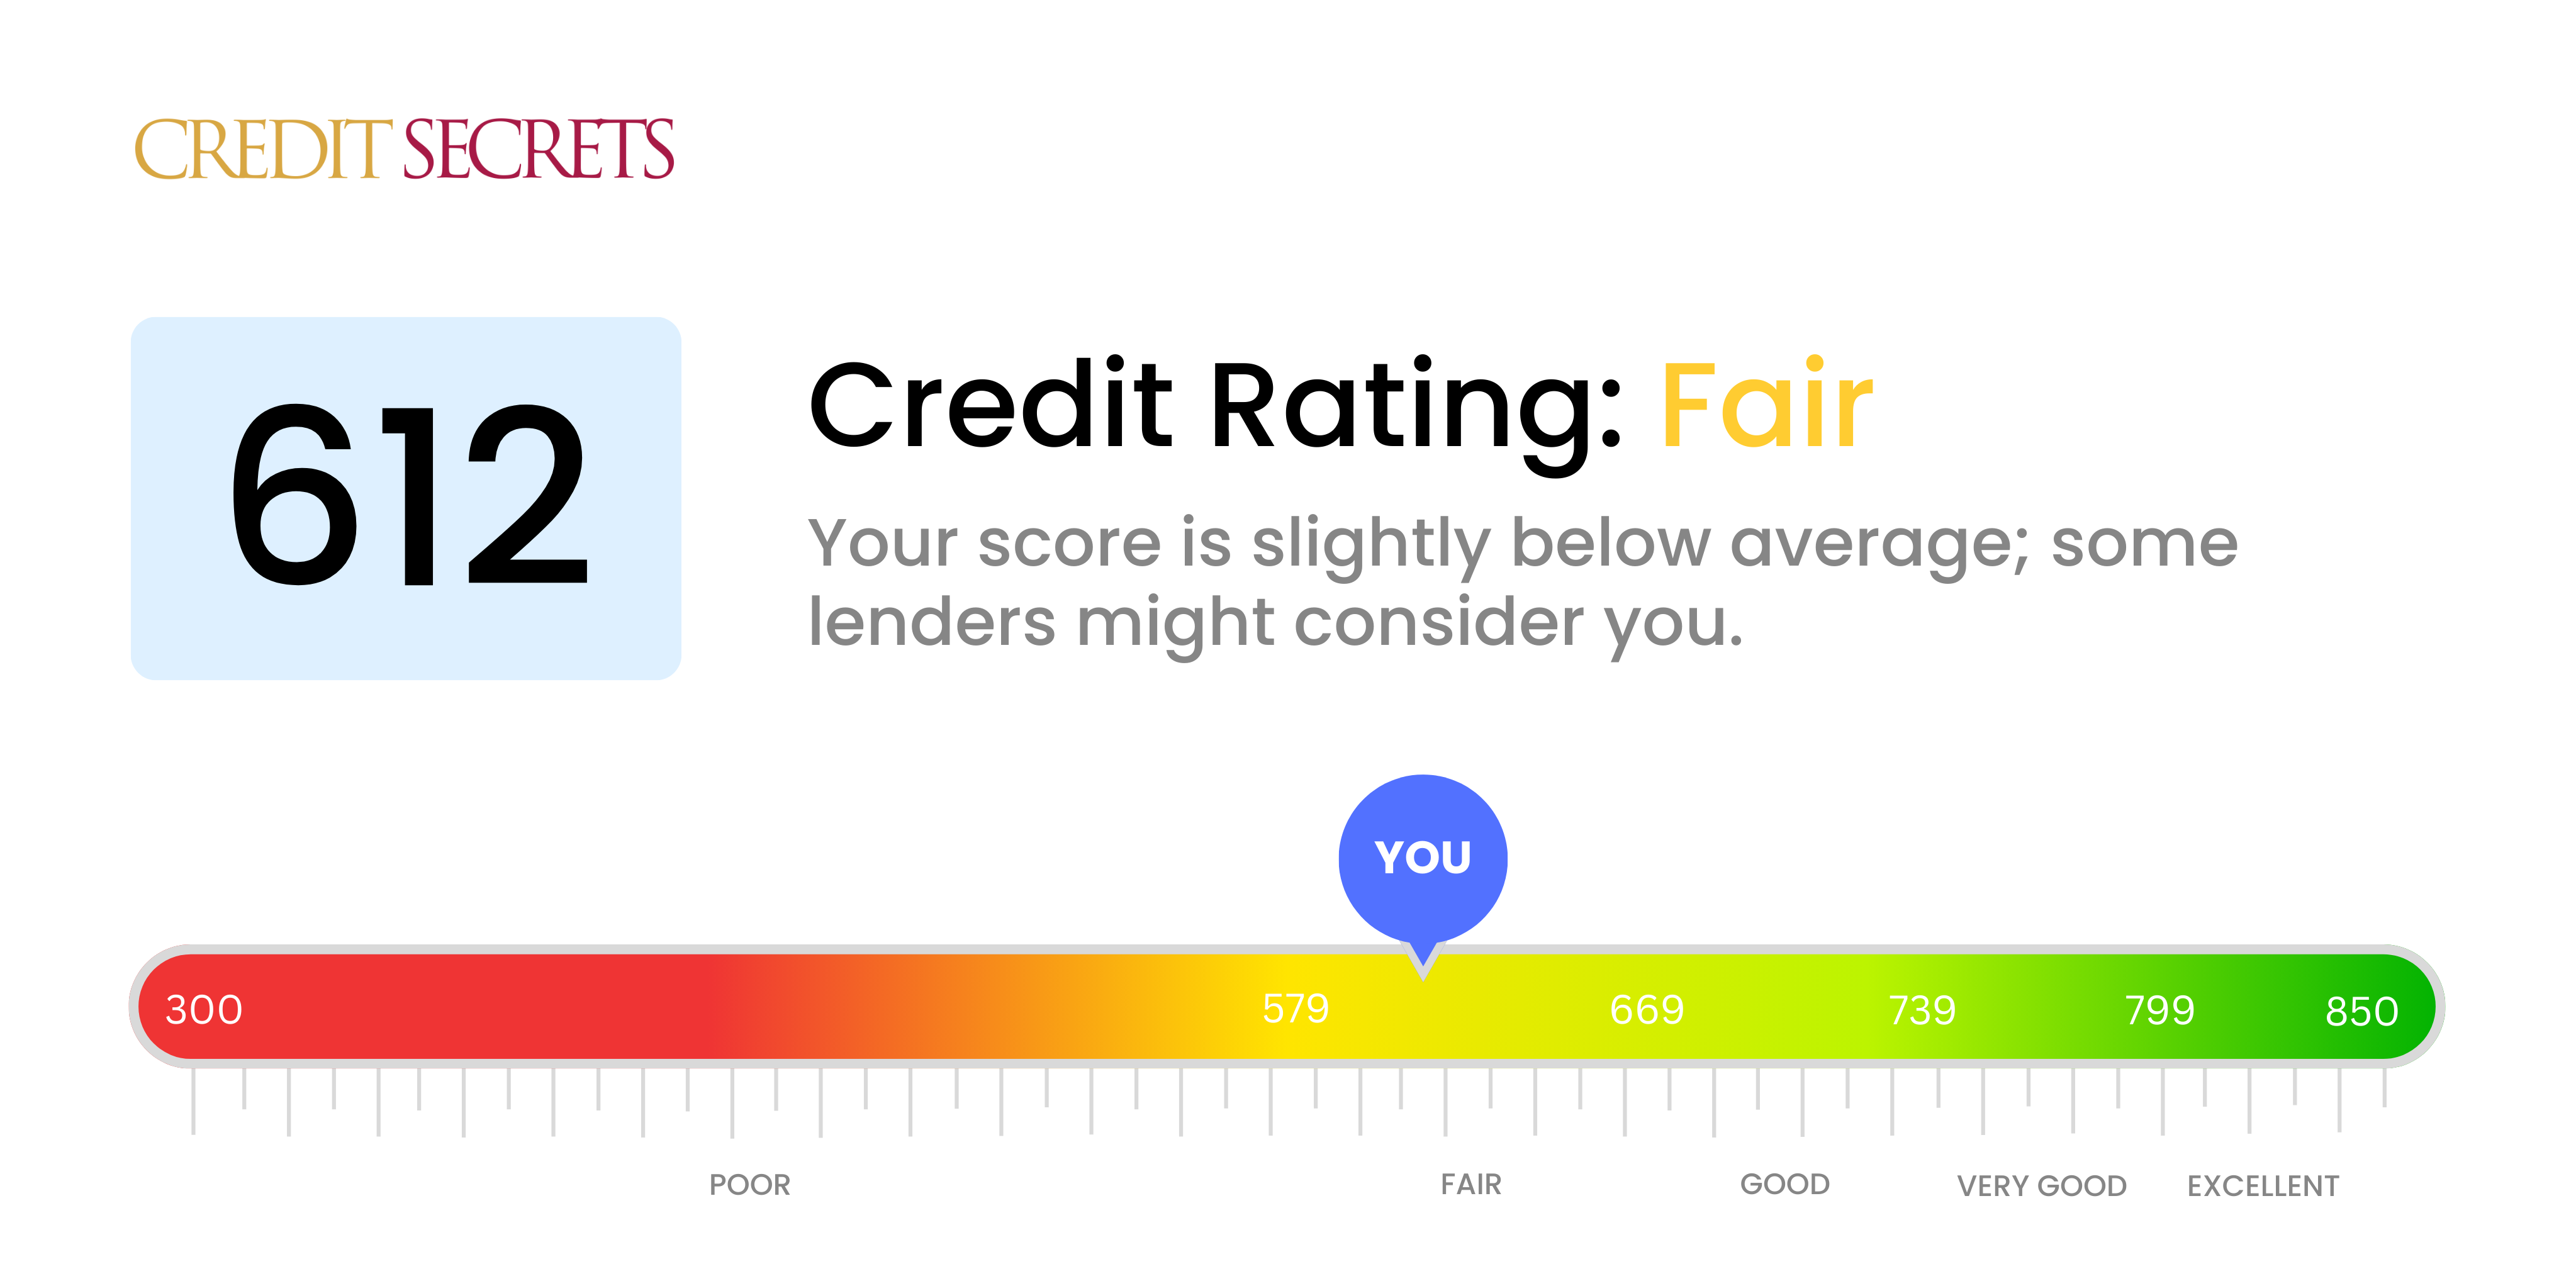 Is 612 a good credit score?